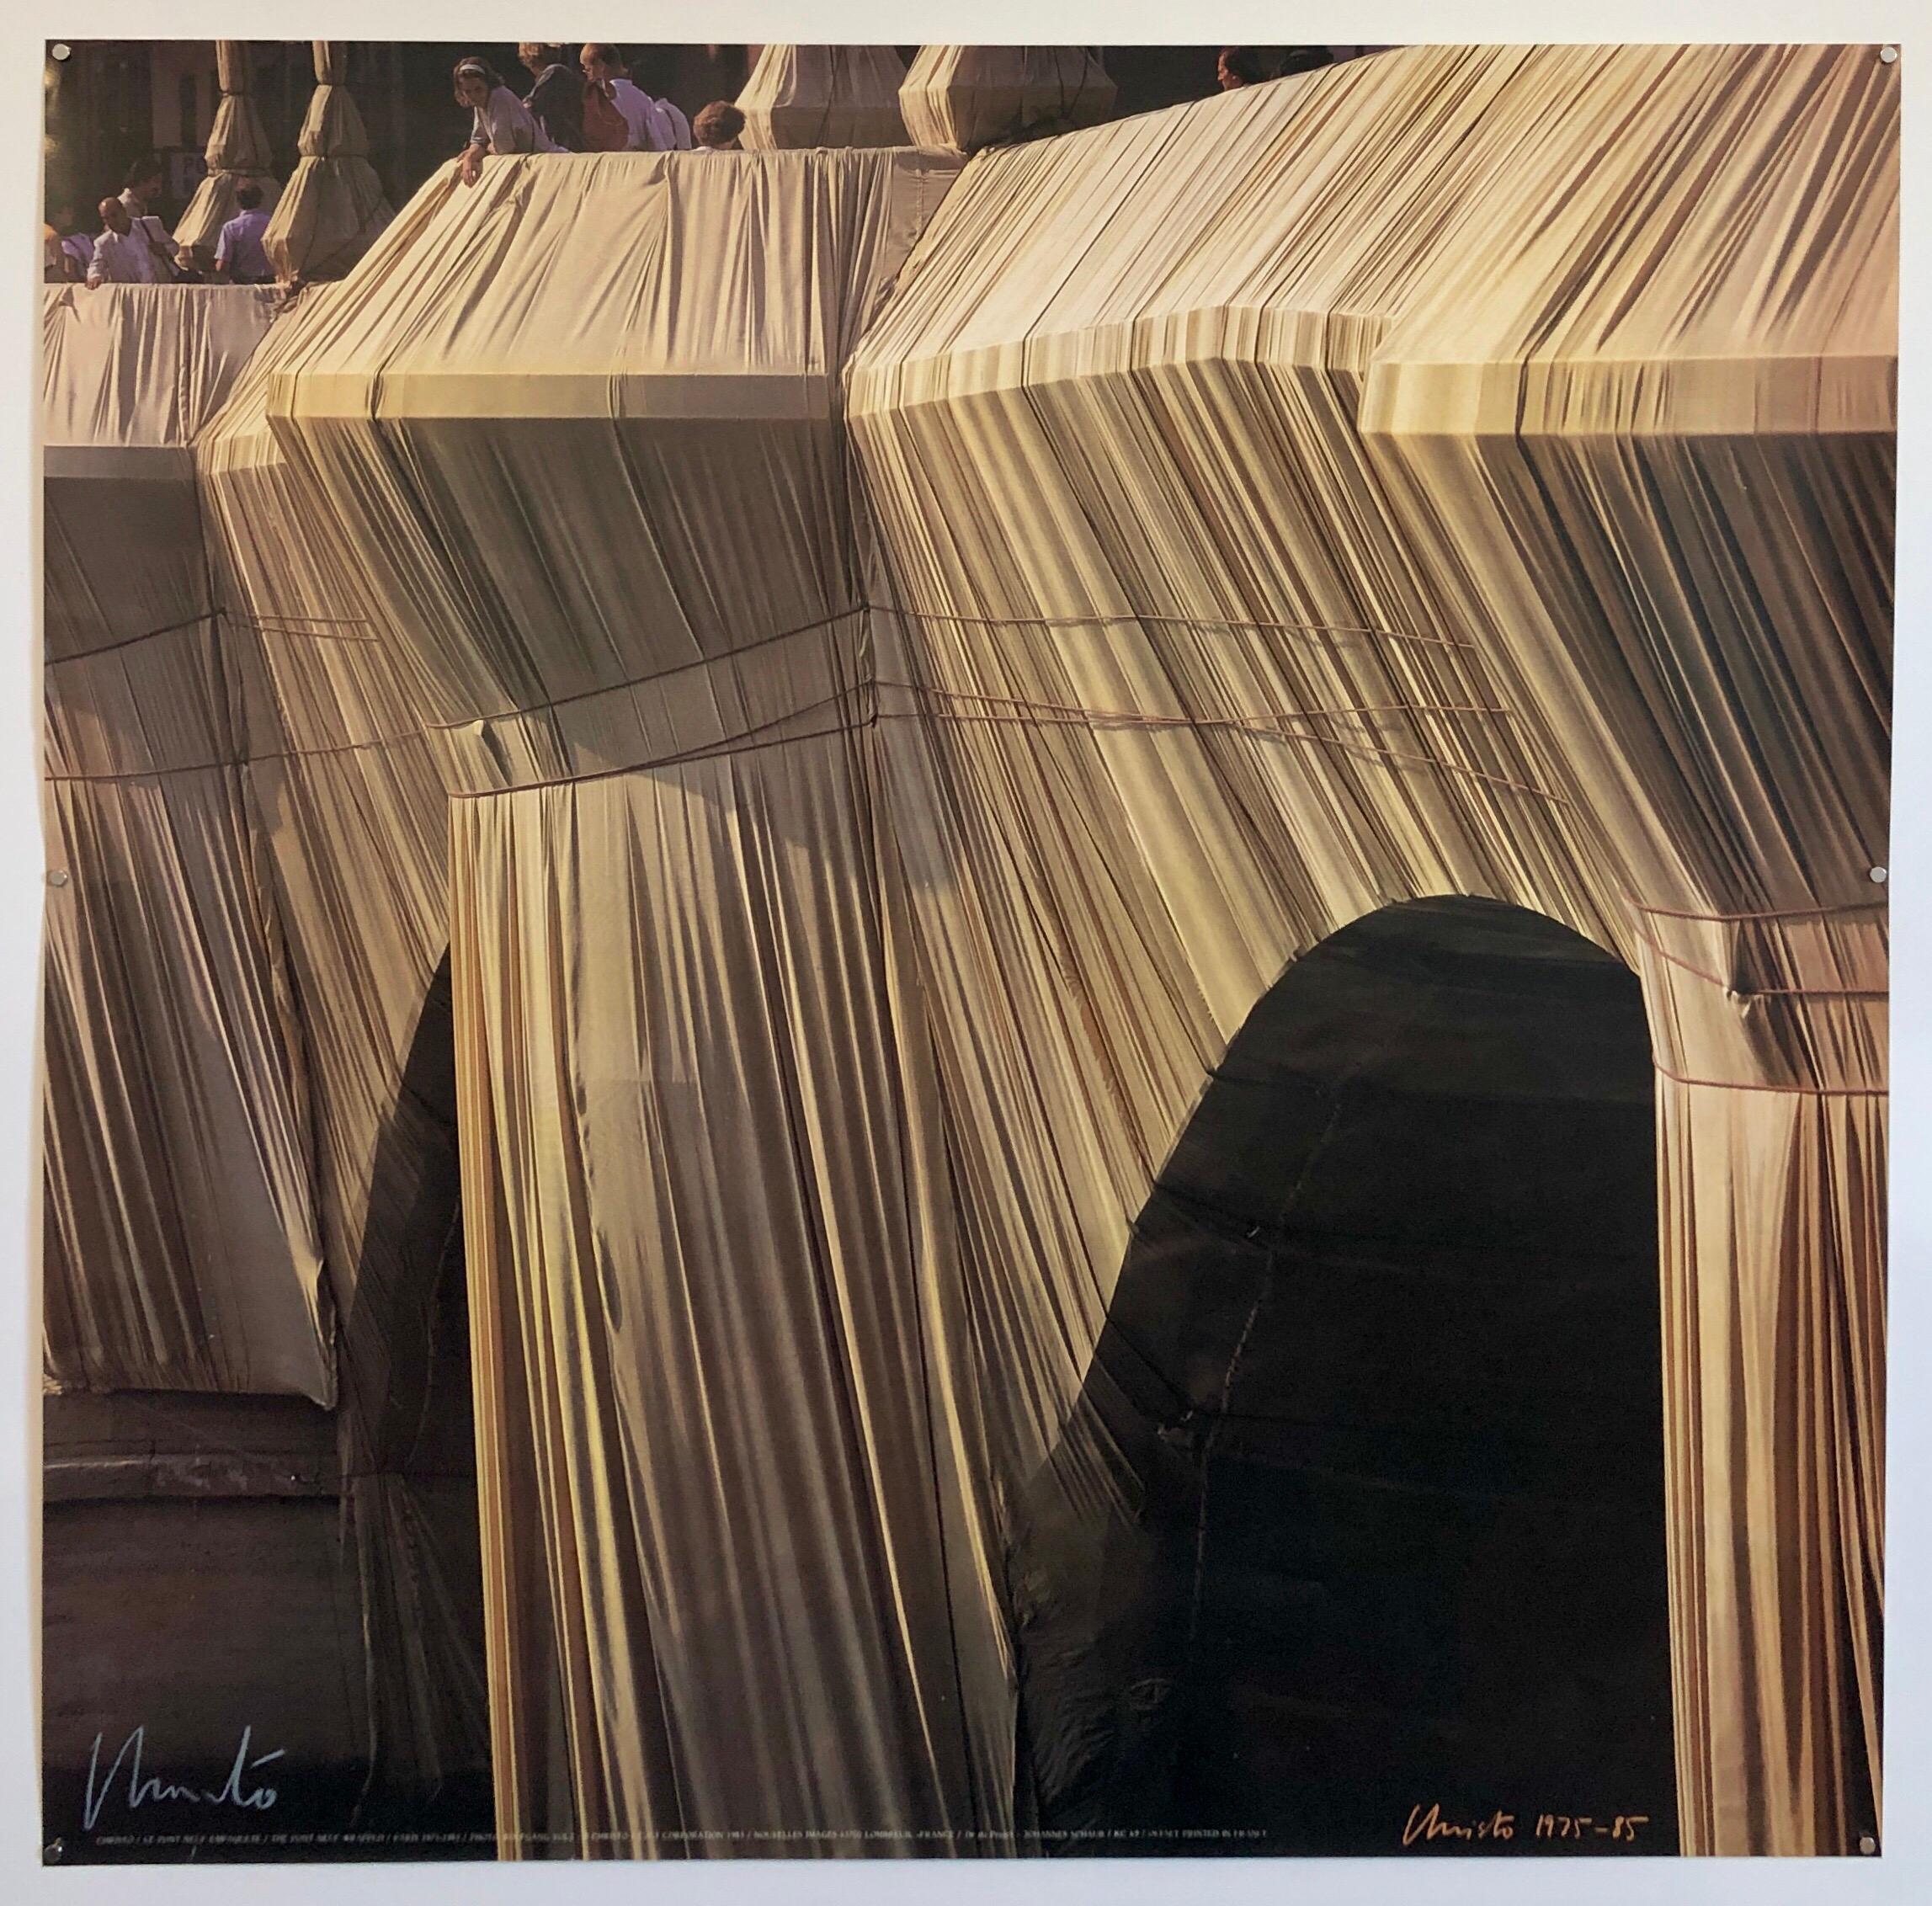 Christo Photograph, Wrapped Pont Neuf, Paris France Hand Signed Photo Print - Black Landscape Print by Christo and Jeanne-Claude